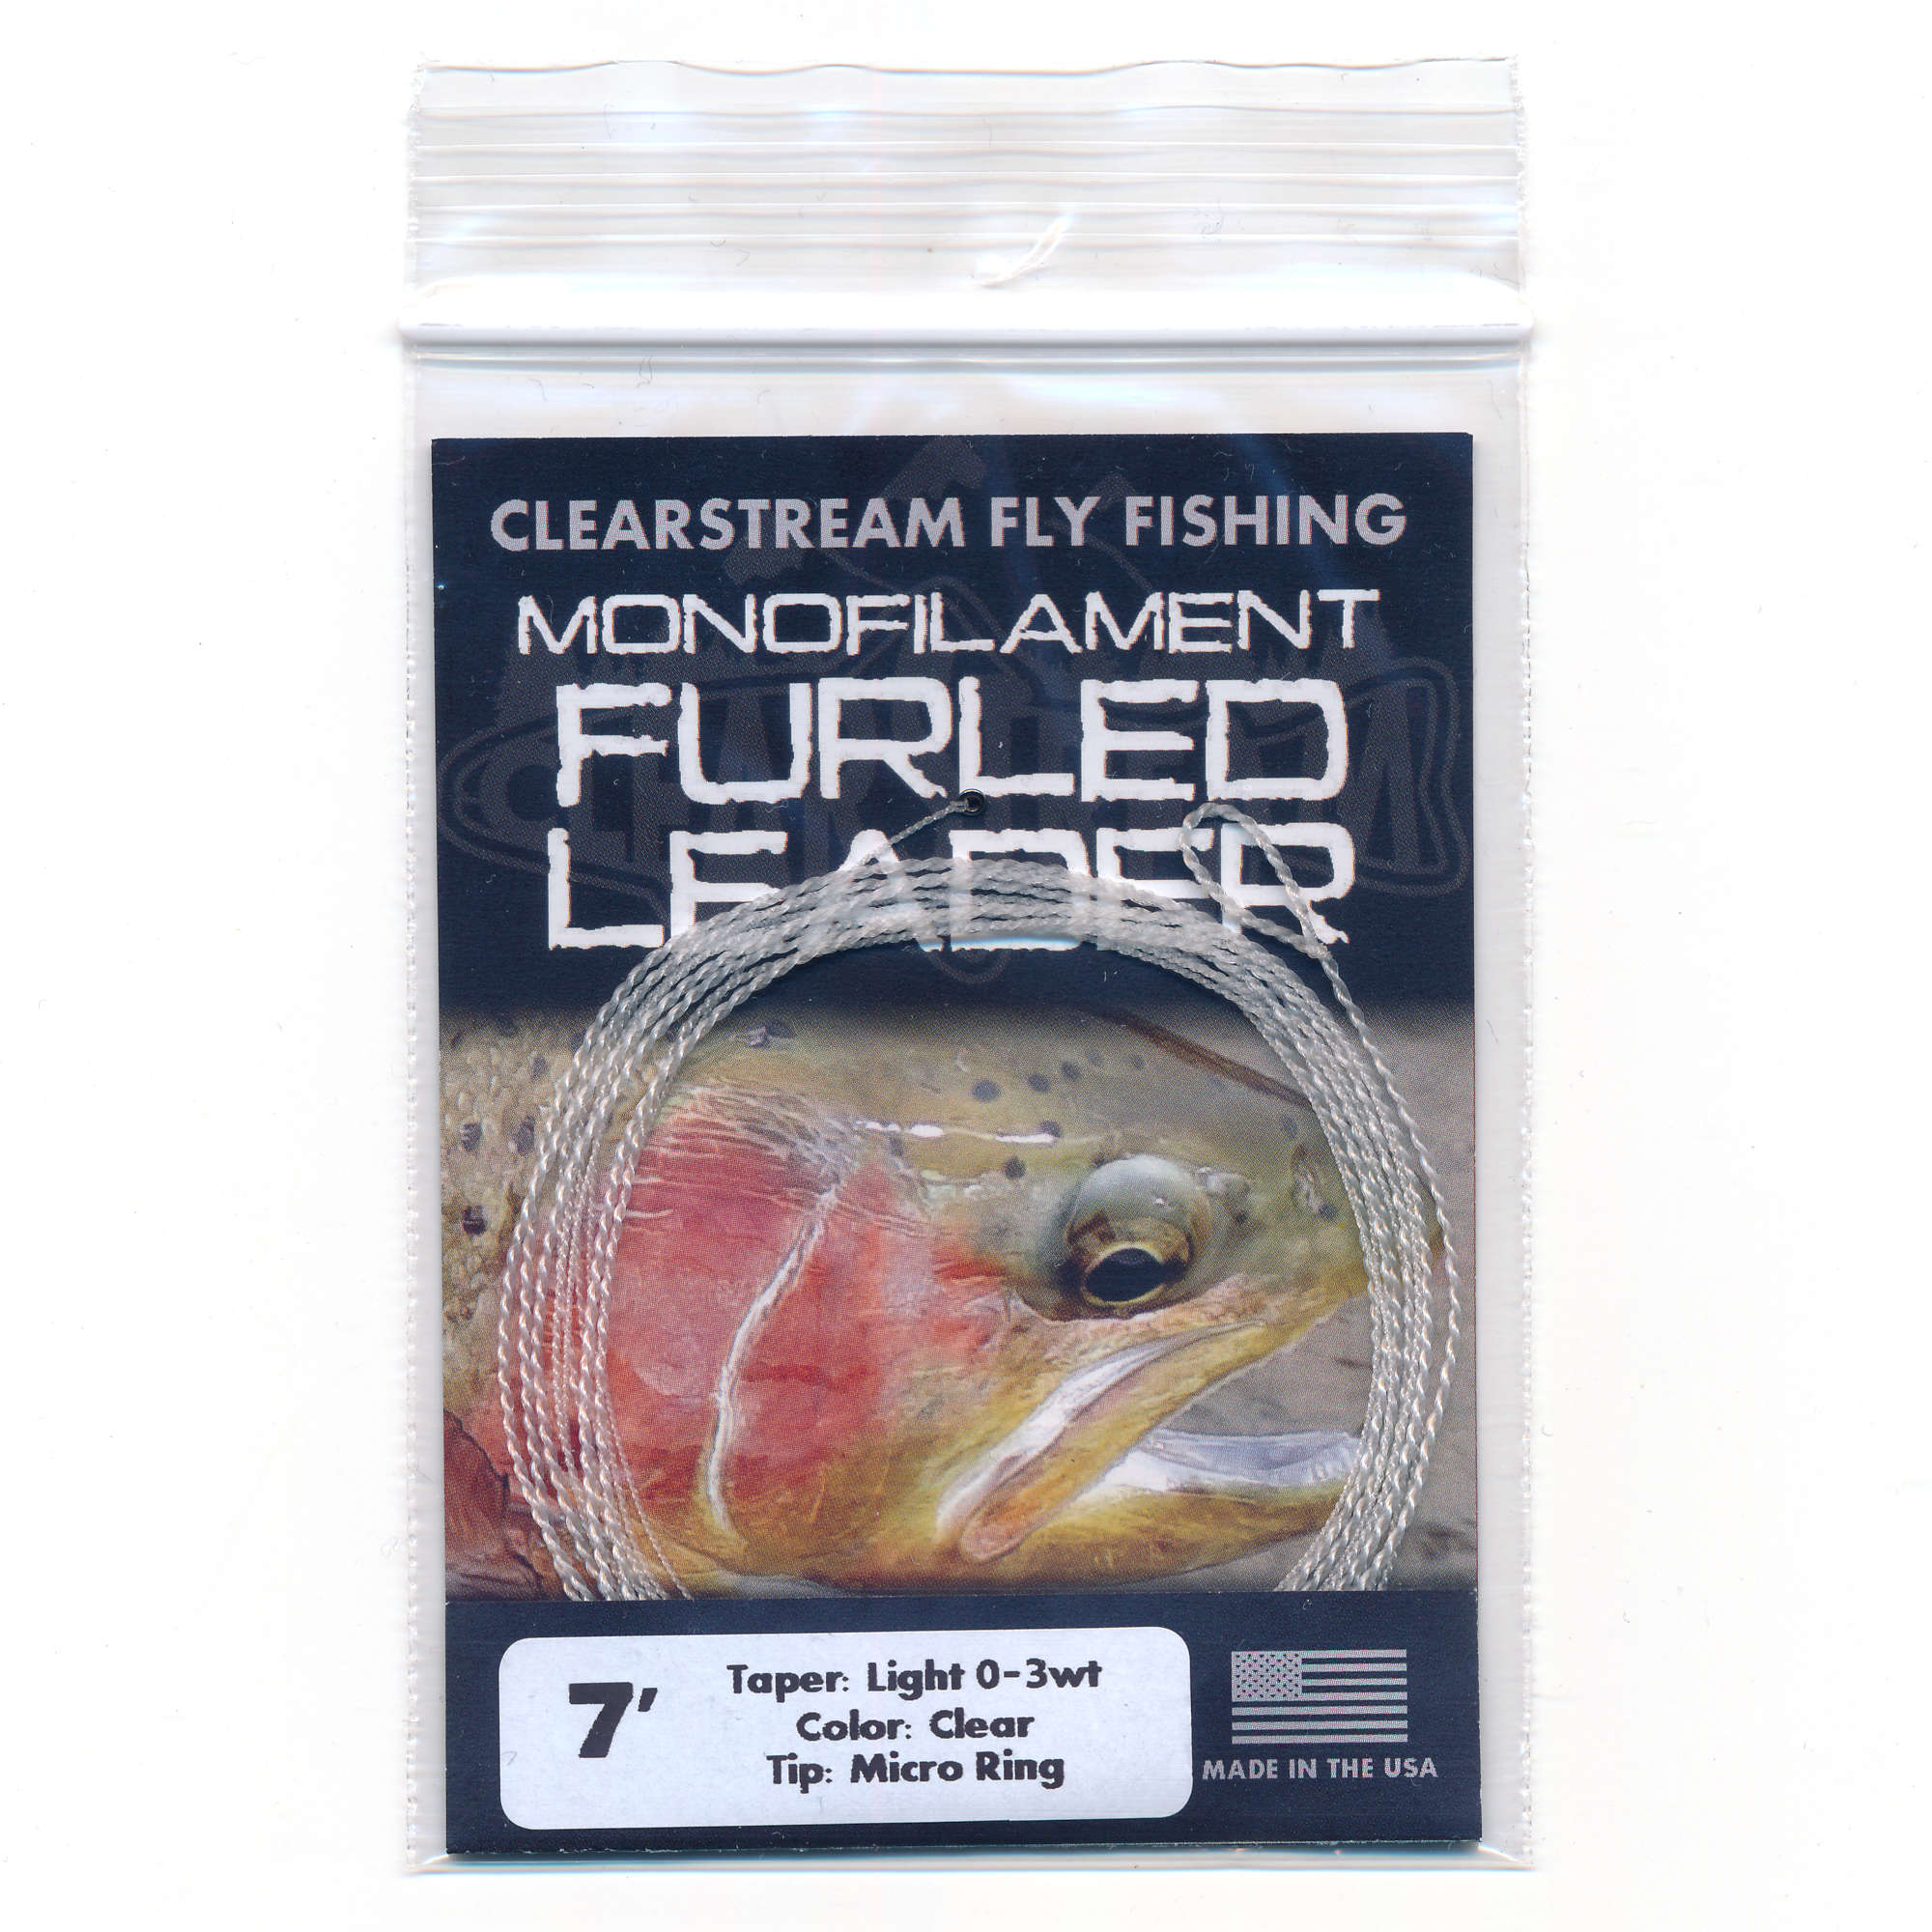 Monofilament Furled Leader – Clearstream Fly Fishing